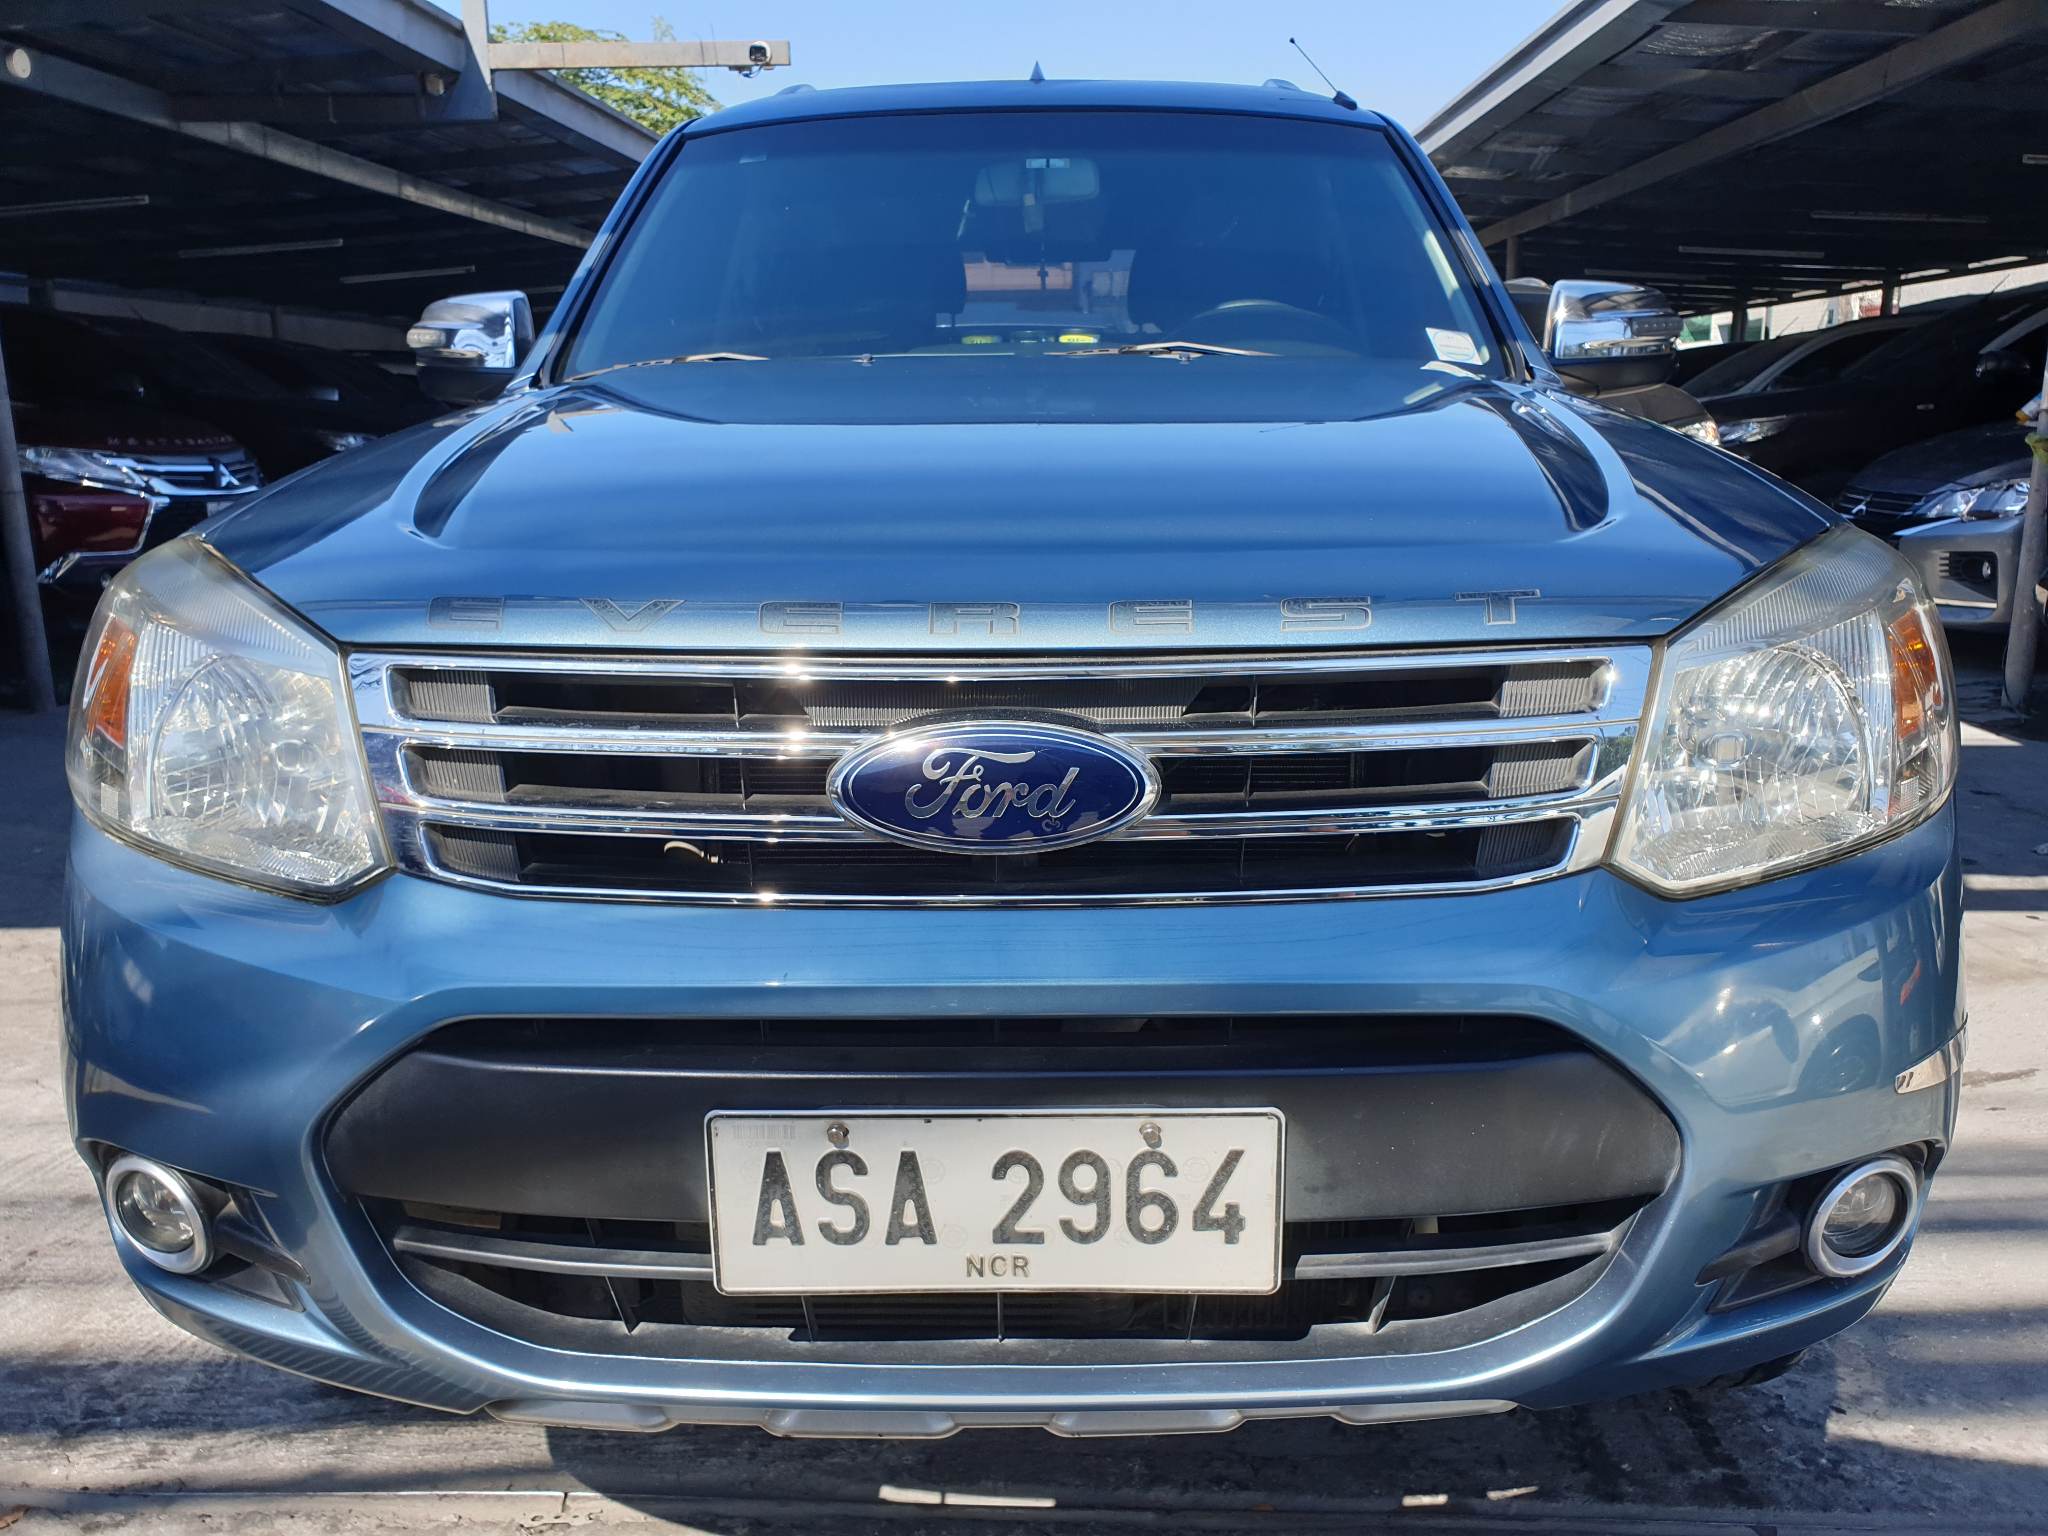 Used 2015 Ford Everest 2.5L Limited AT